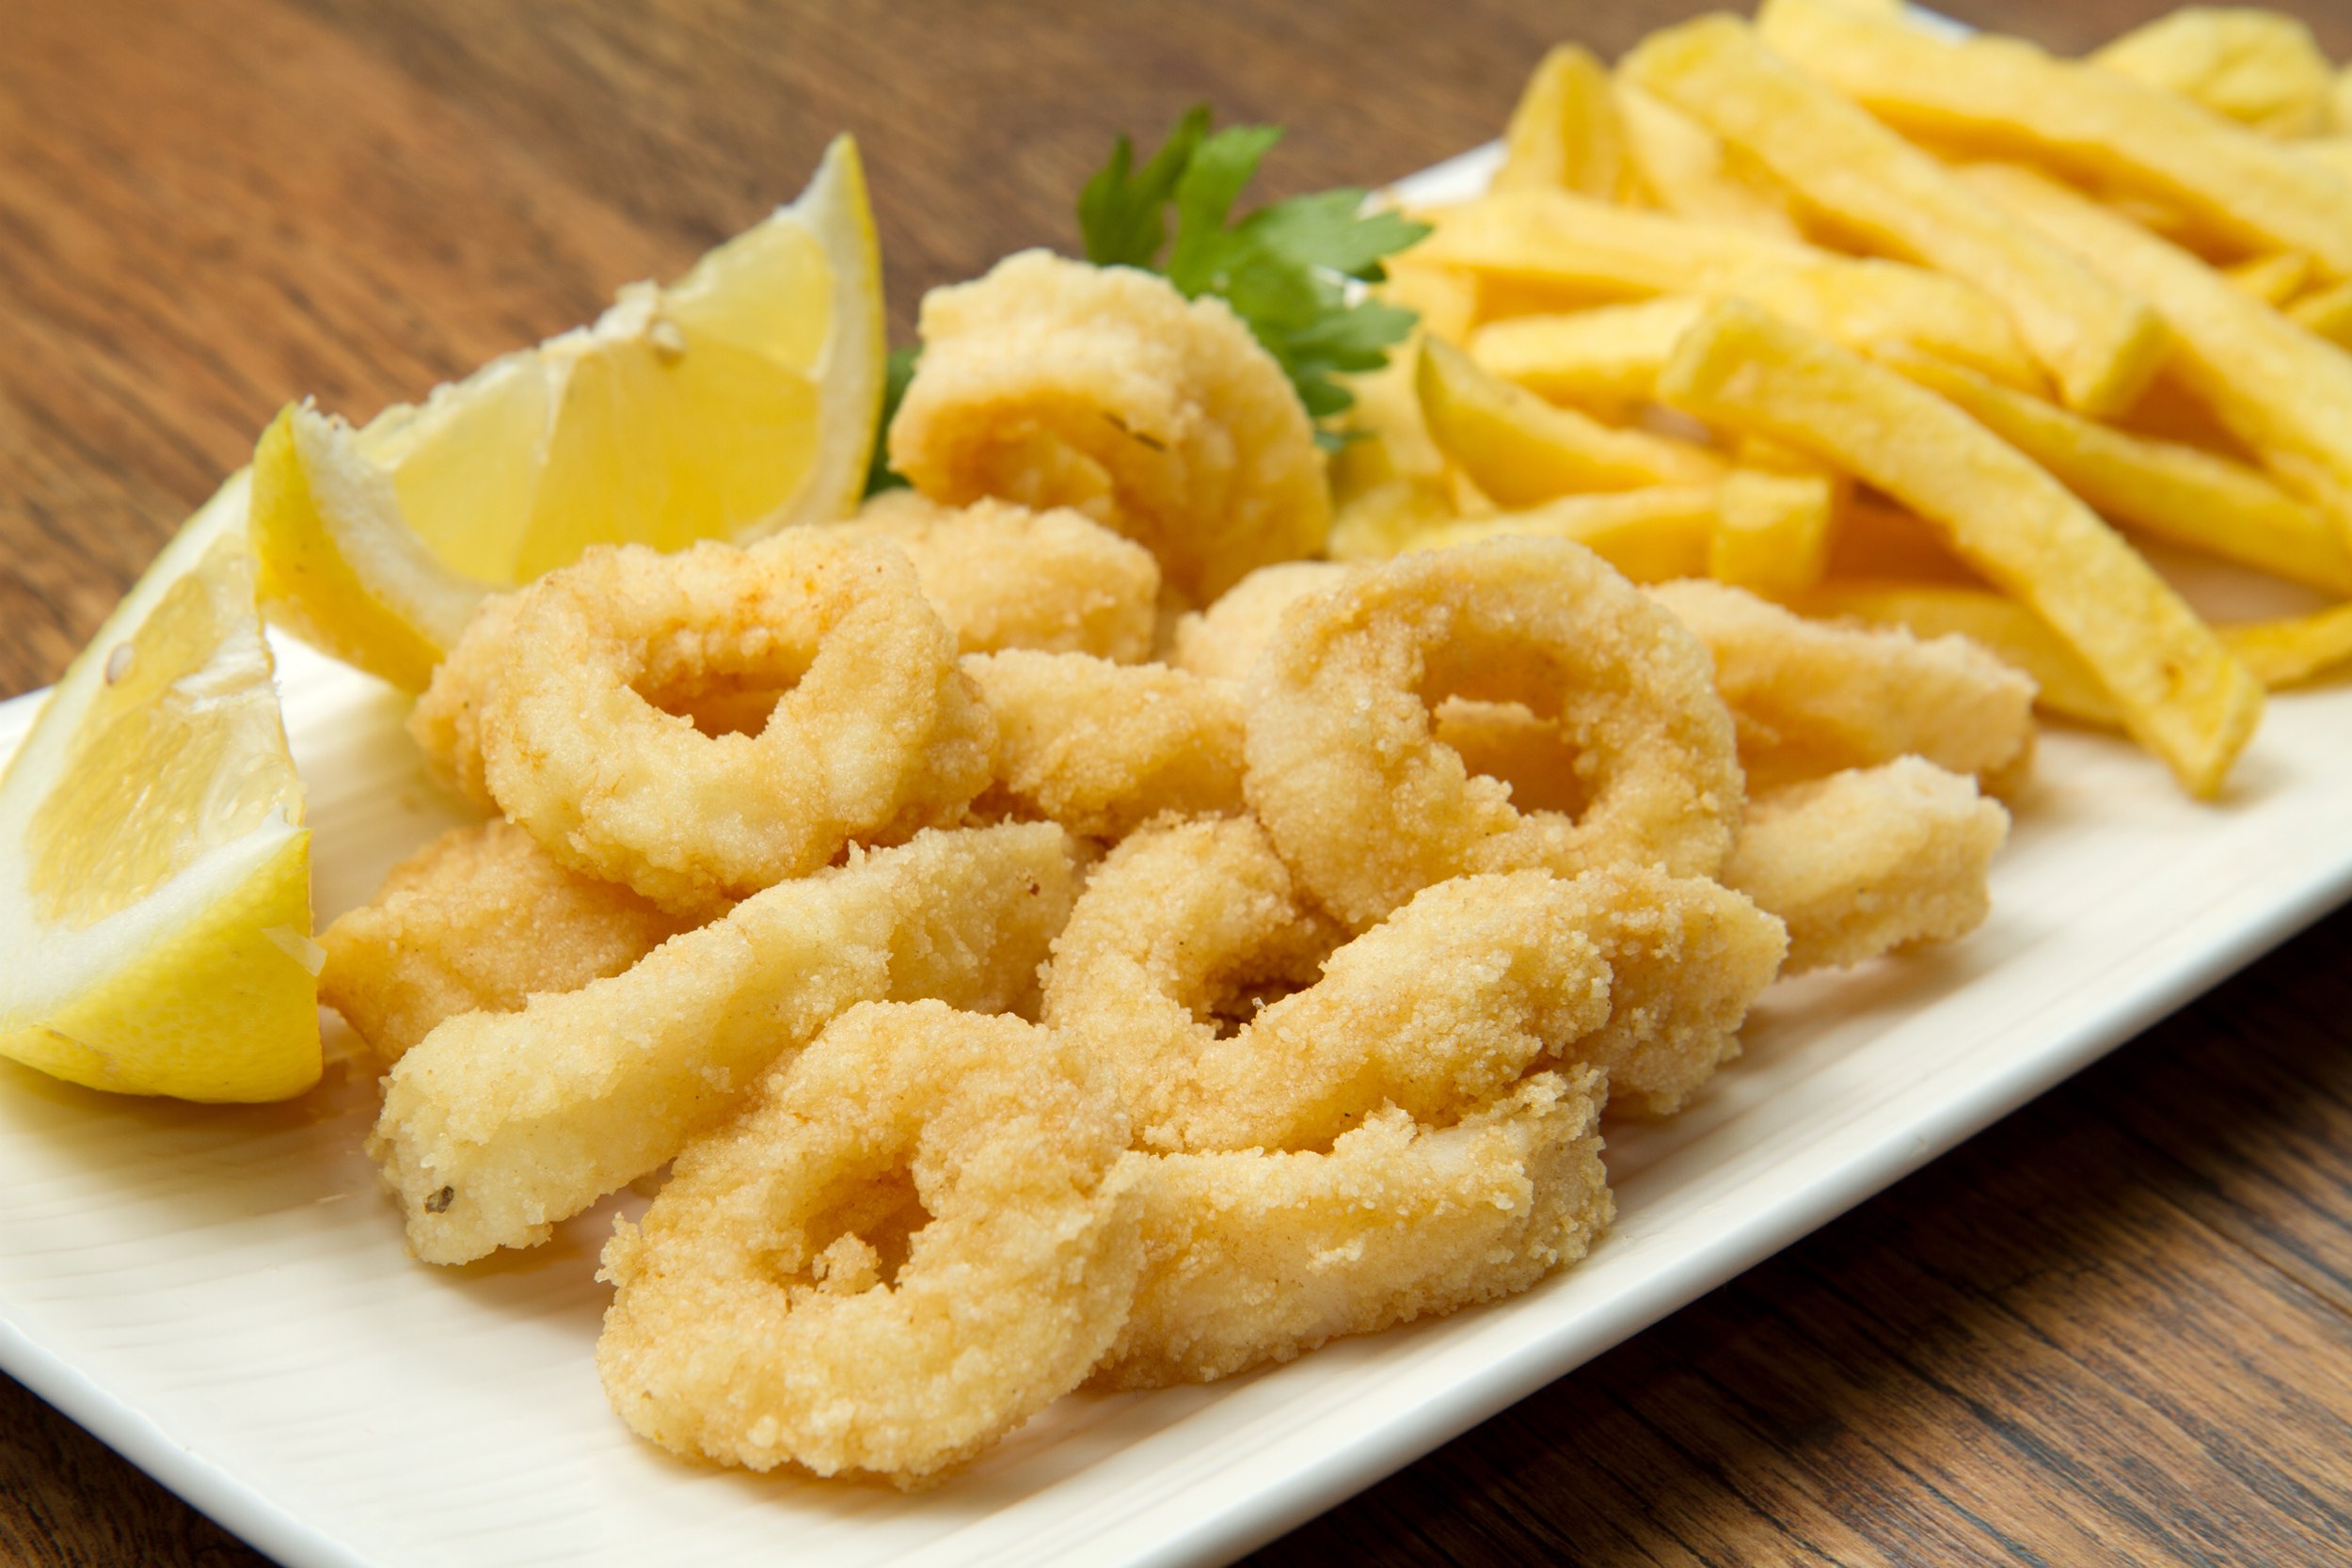 A plate of calamari and chips - Best Fish And Chips in Noosa